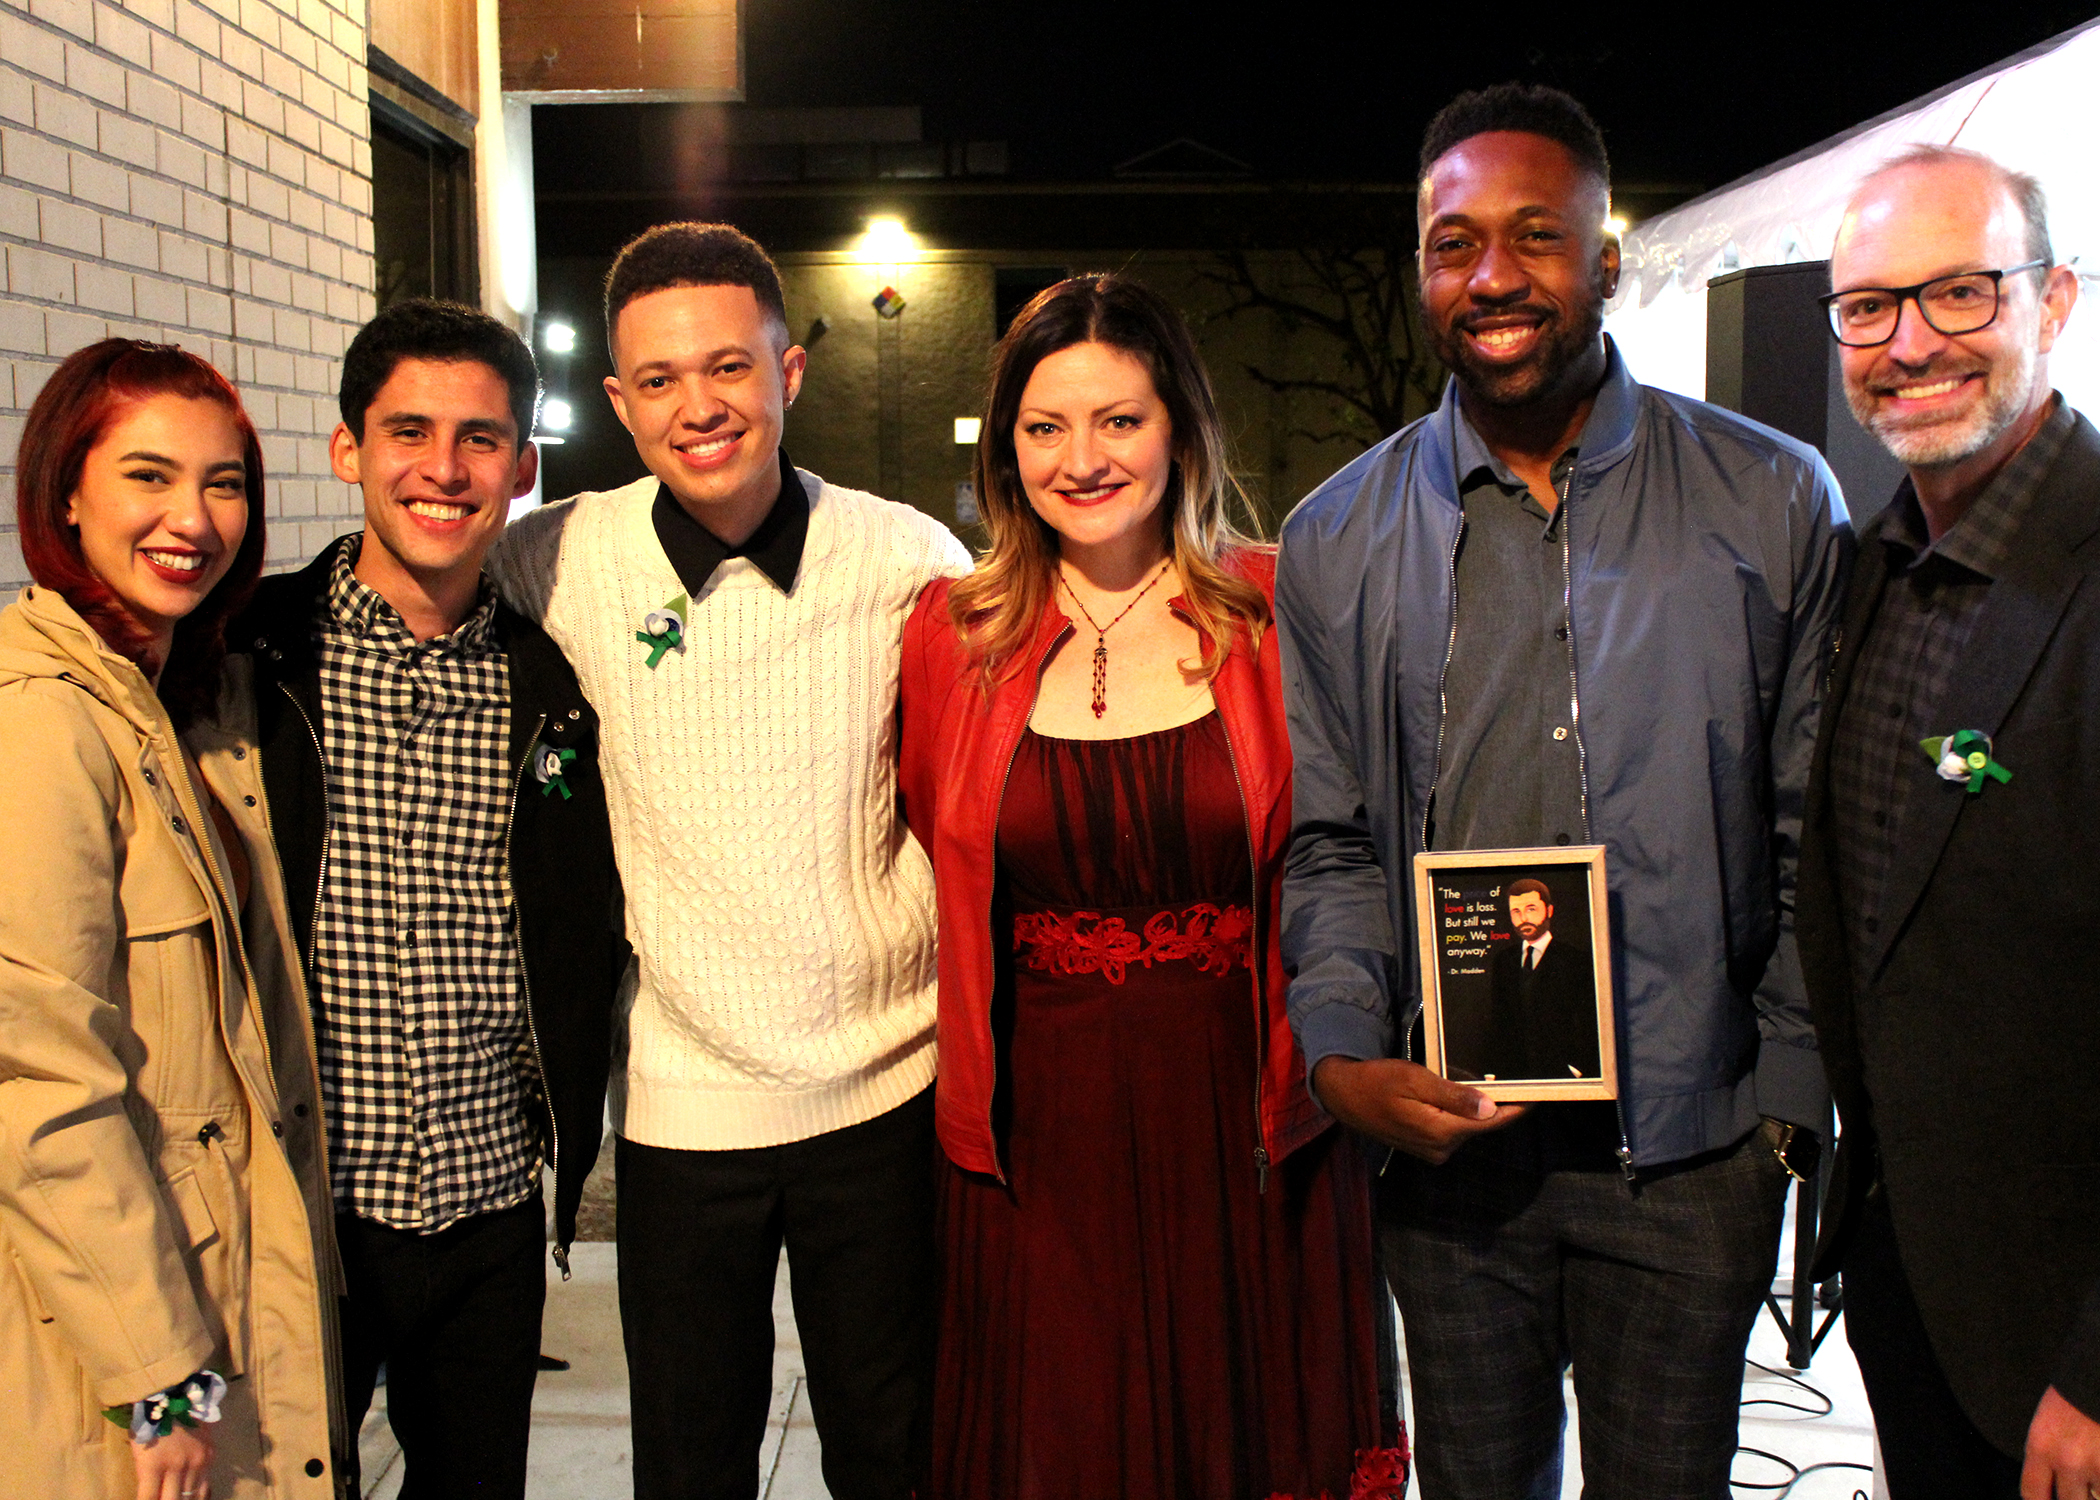 The cast and their director - Angie Chavez, Jared Machado, Jaylen Baham, Jocelyn A. Brown, Tym Brown, and Matthew McCray - on Opening Night of 